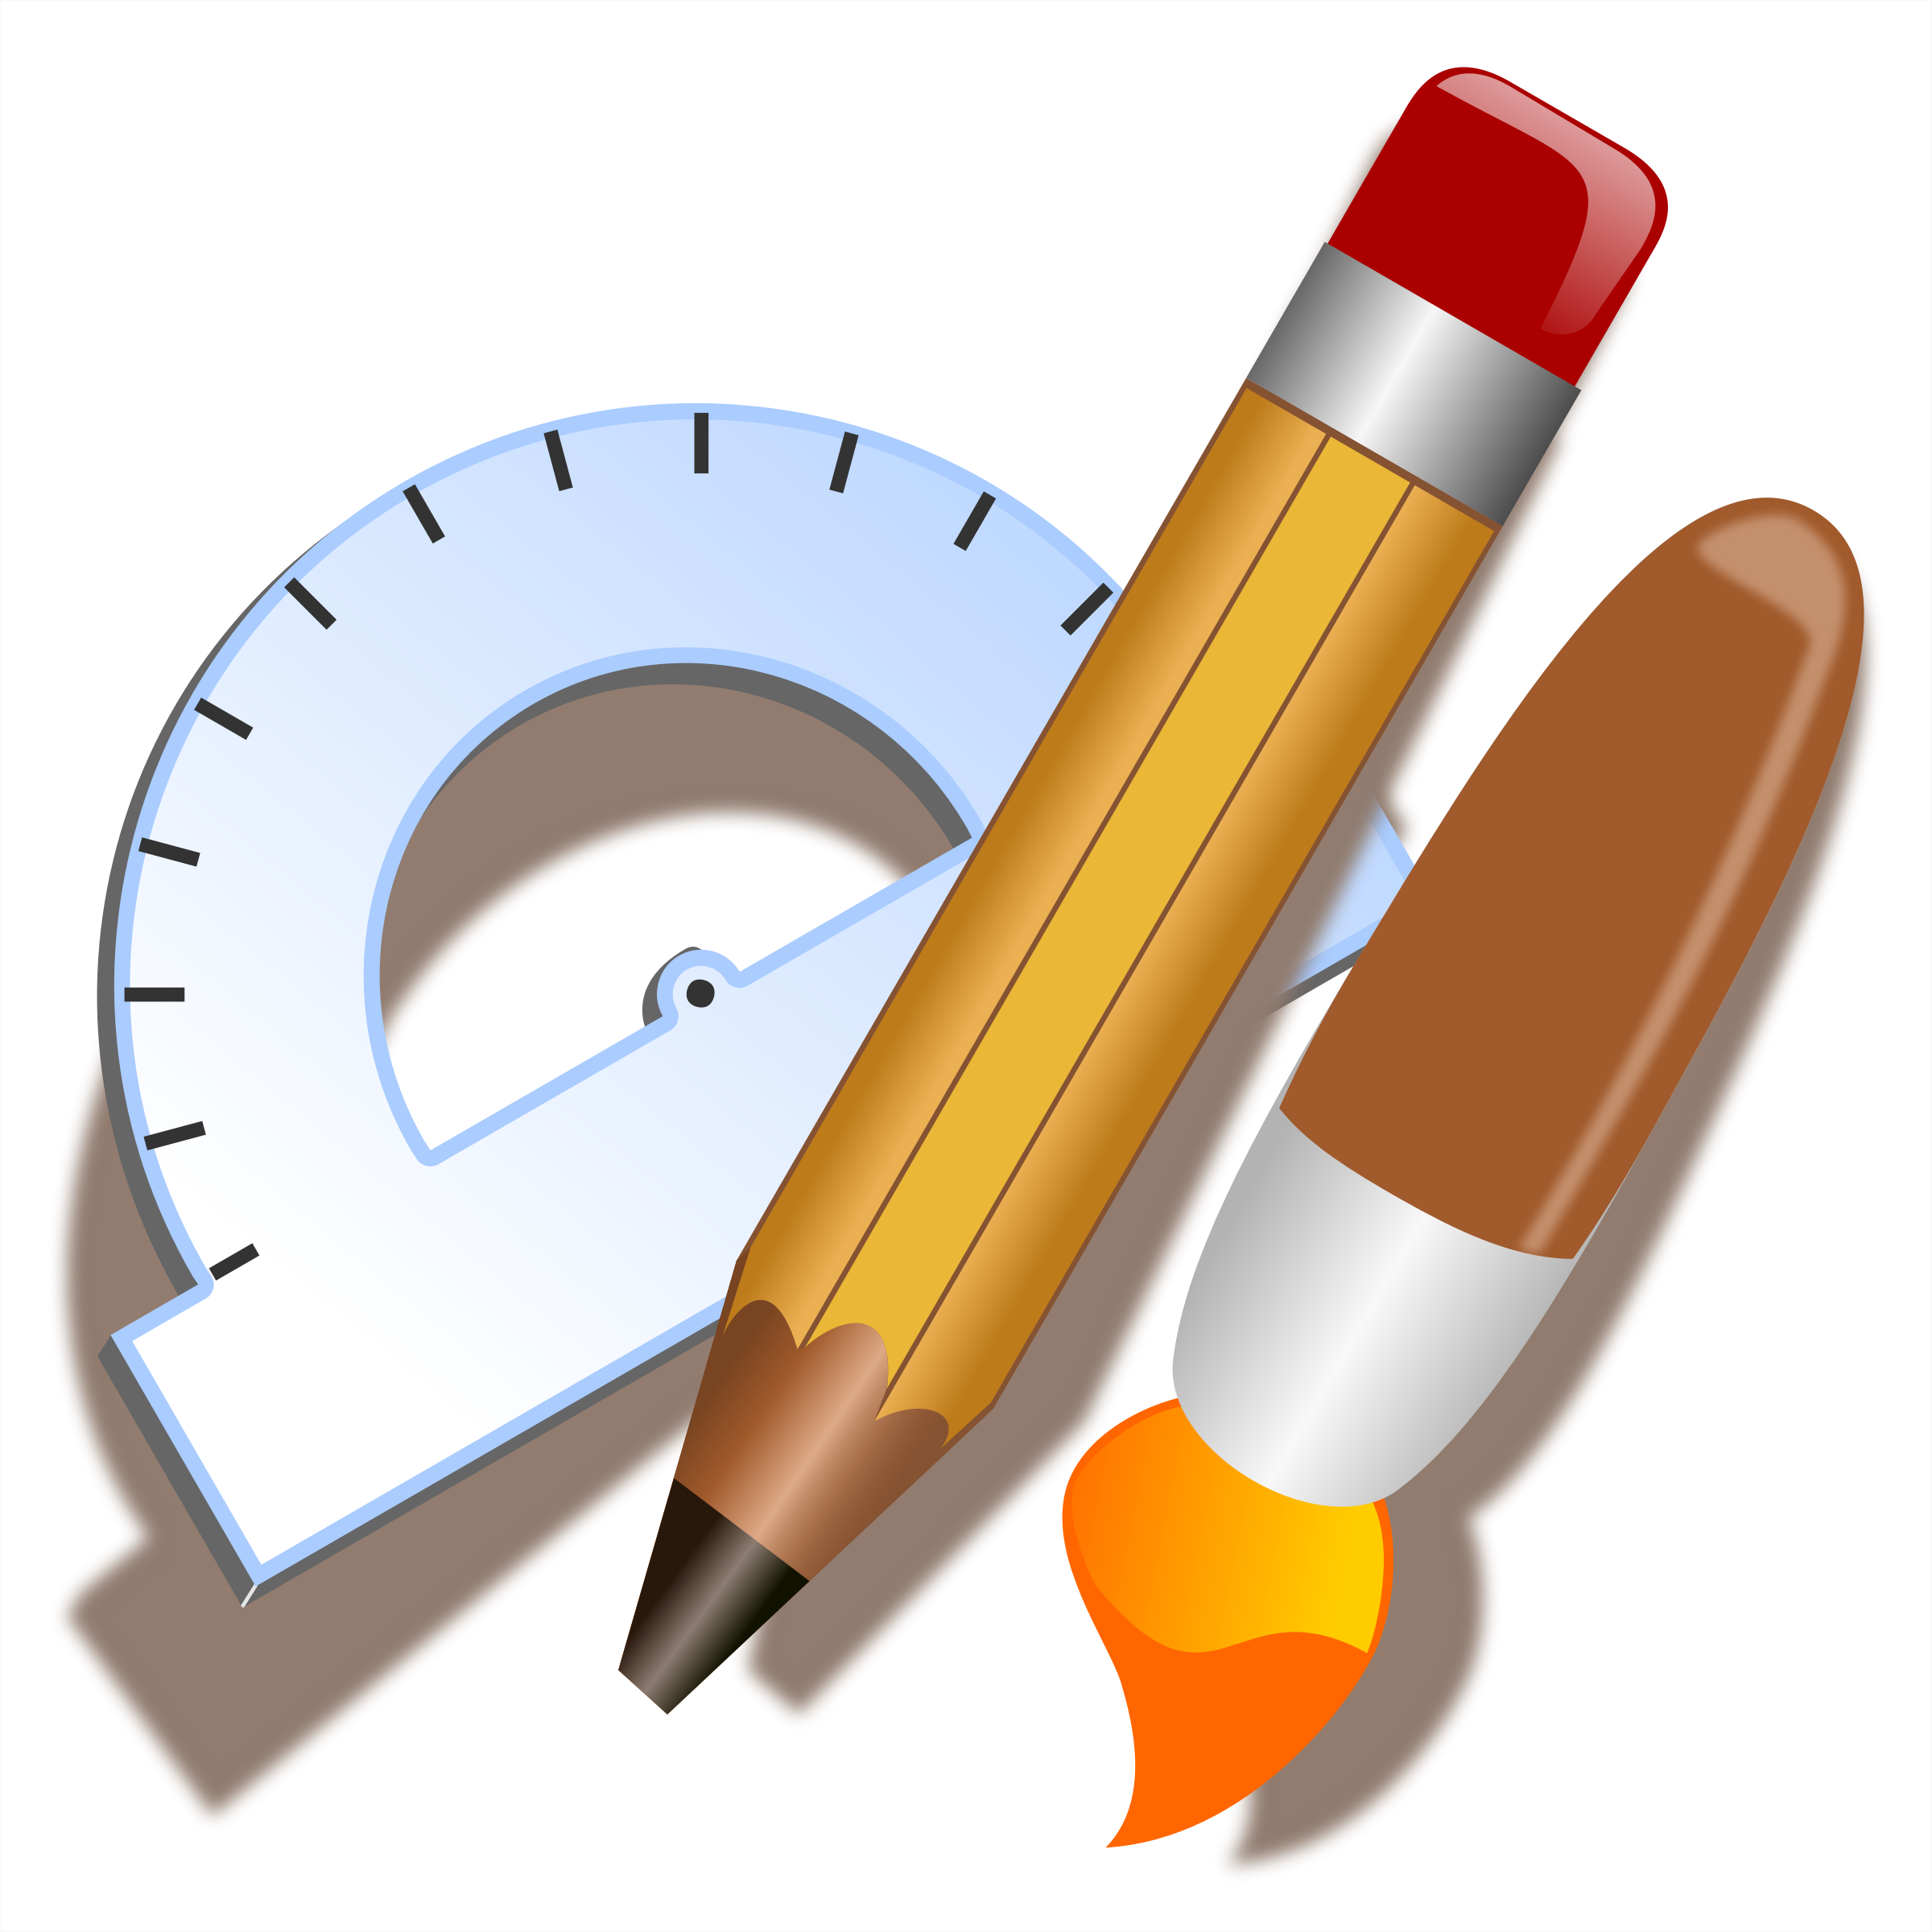 Architecture & Construction - Drawing Tools Clipart (2400x2400)